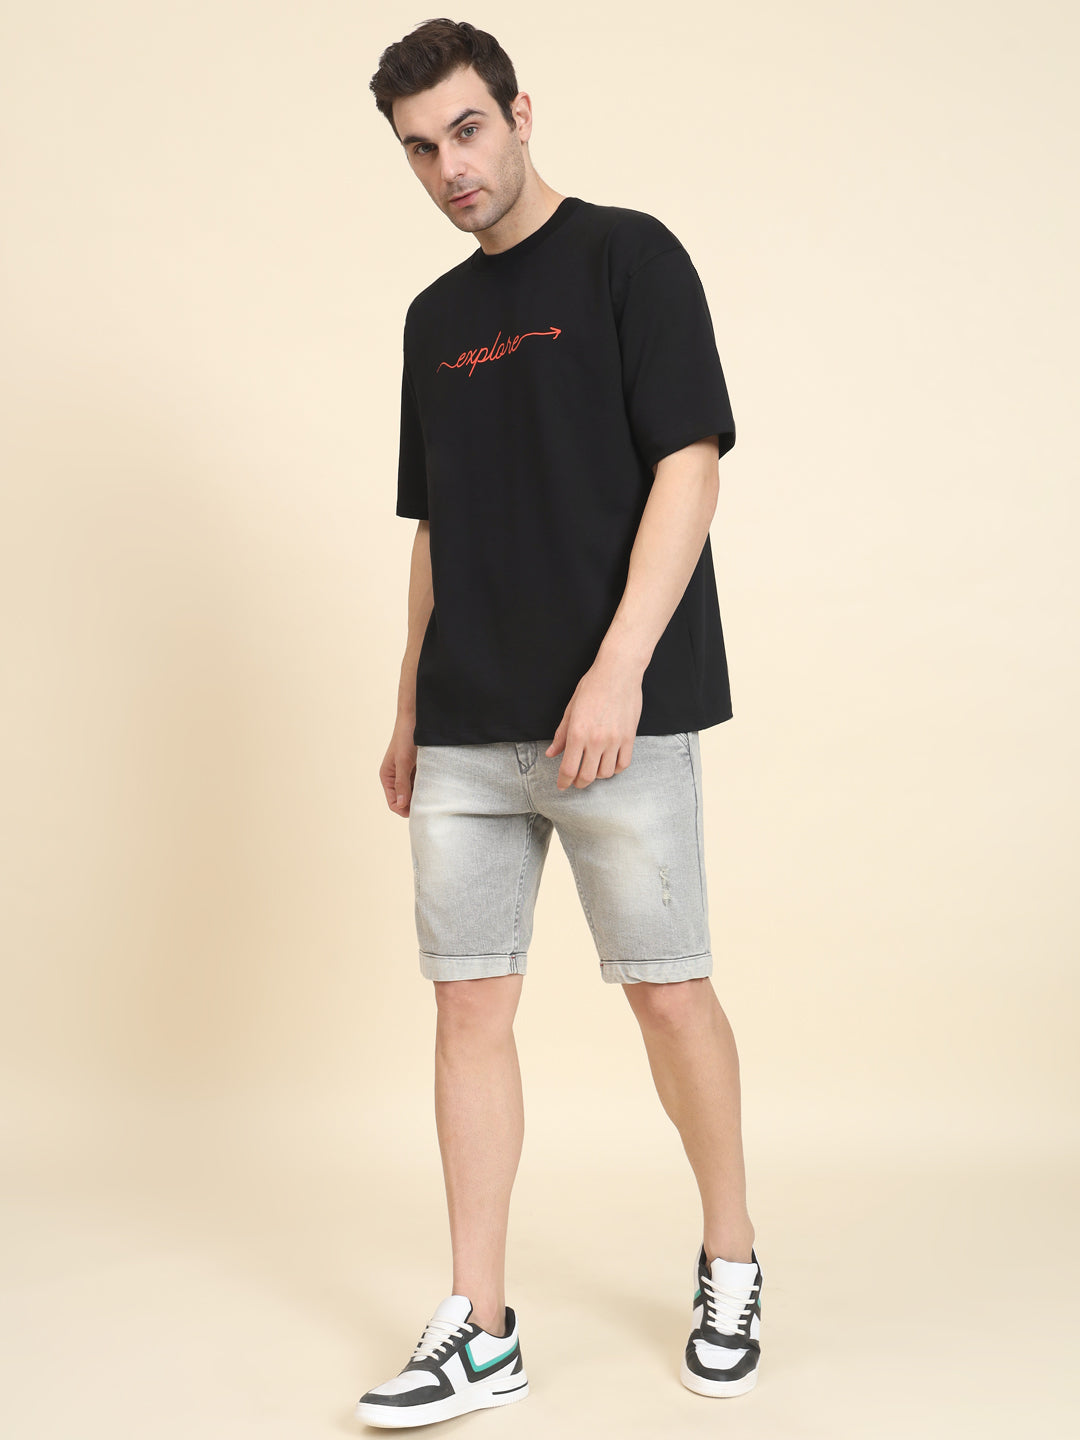 Freedom Print Oversized Carbon T-Shirt